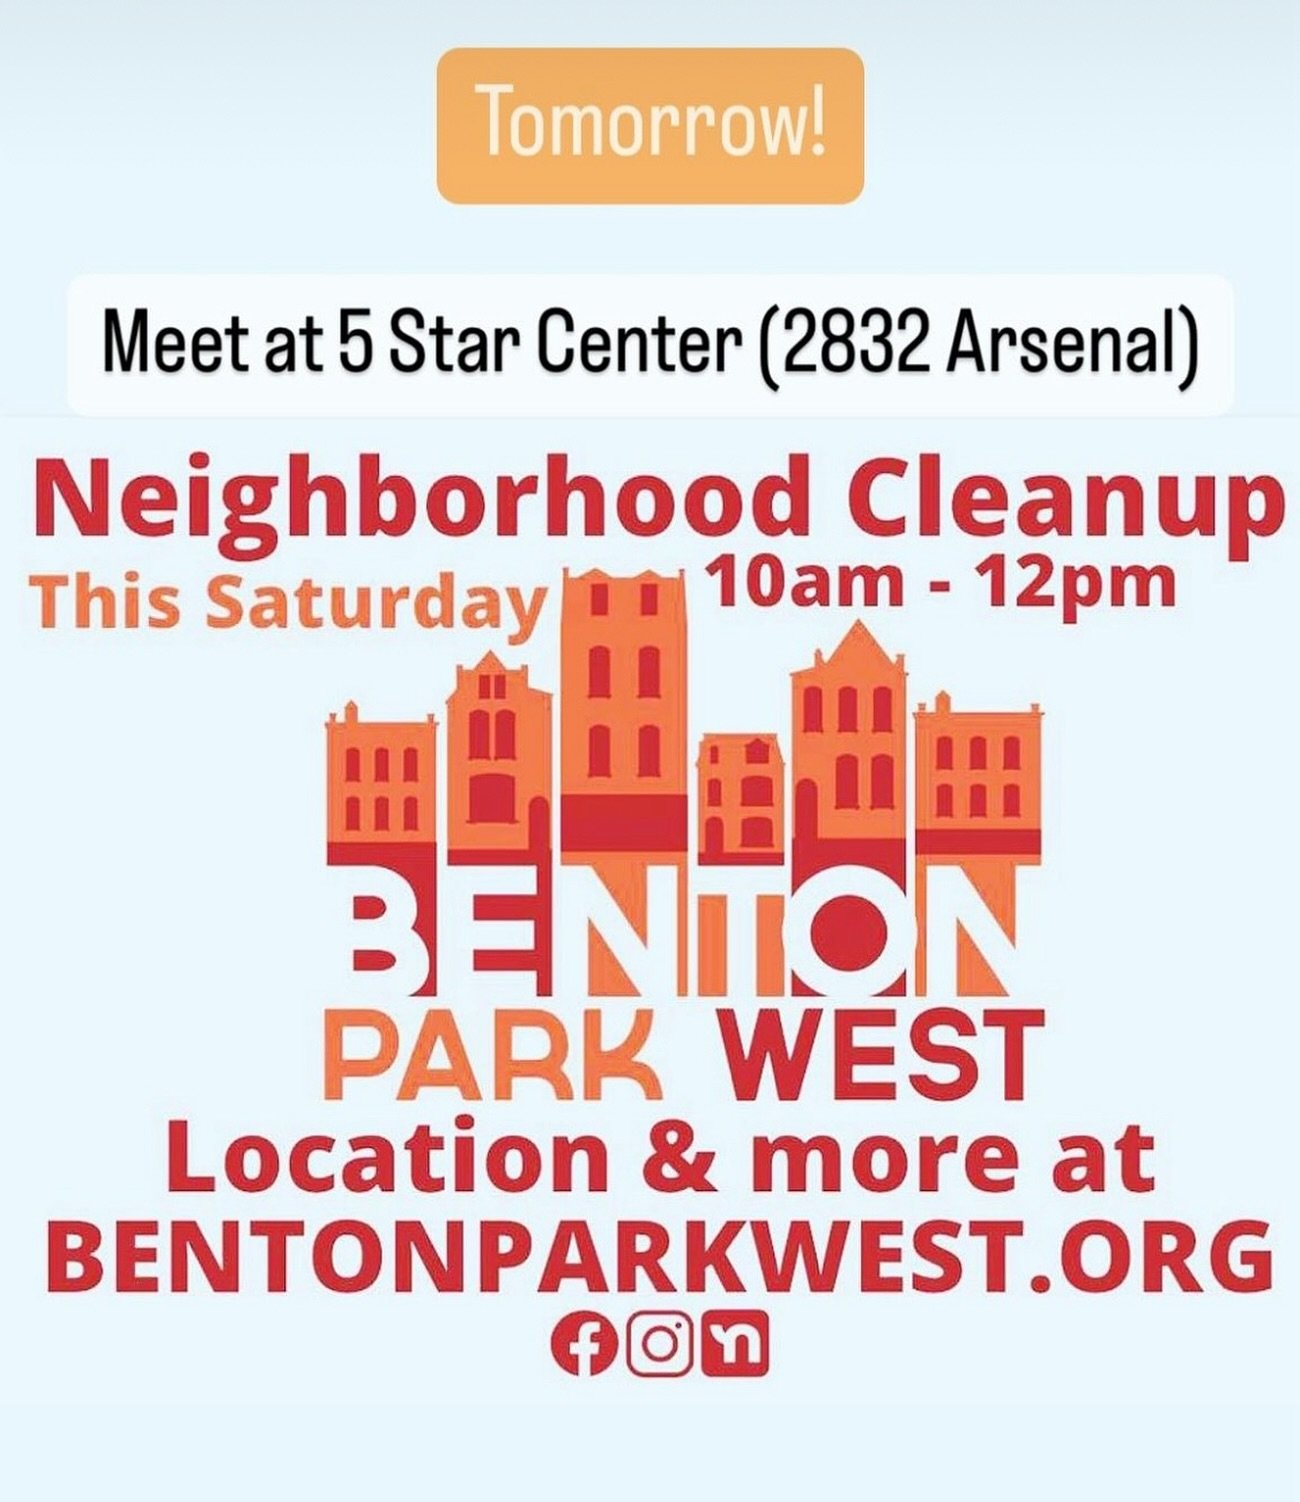 Benton solidarity tomorrow - if you&rsquo;re interested in joining the cleanup crew look no further!